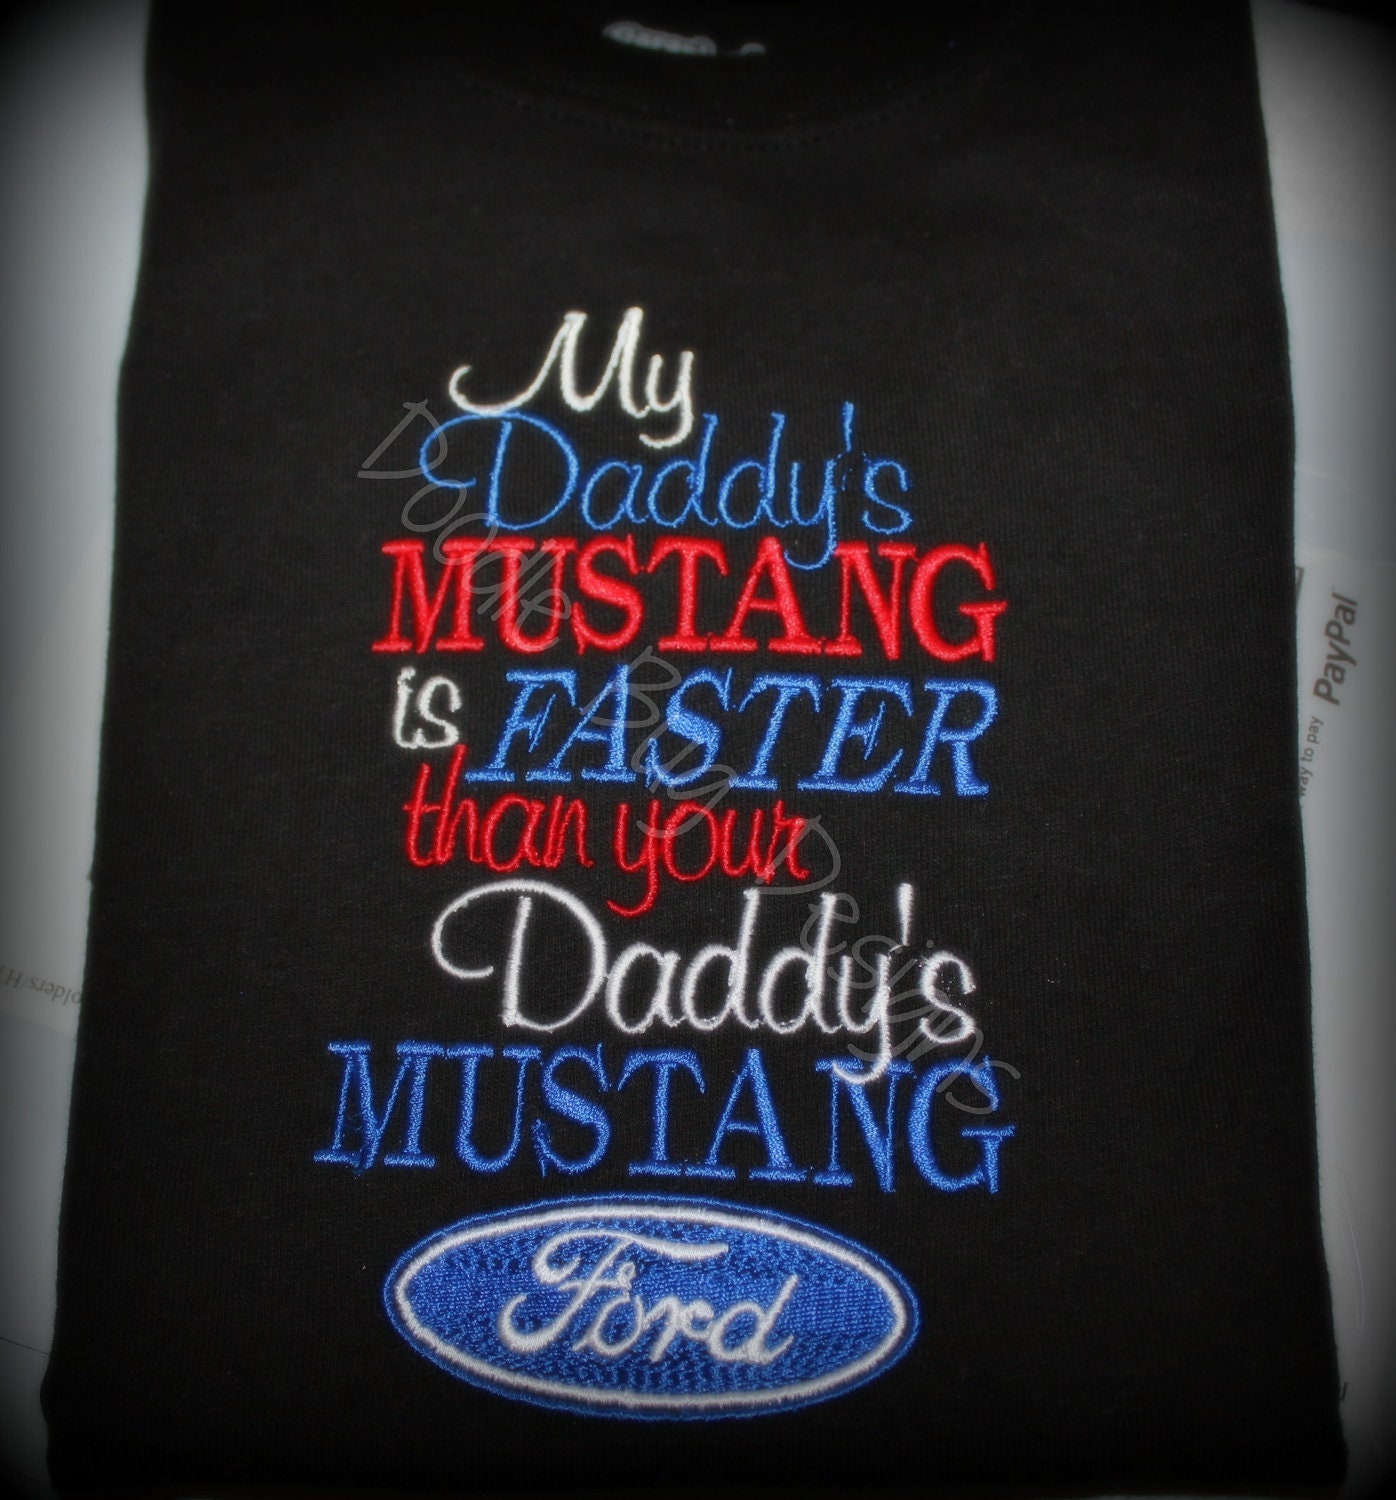 Bad sayings about ford #8